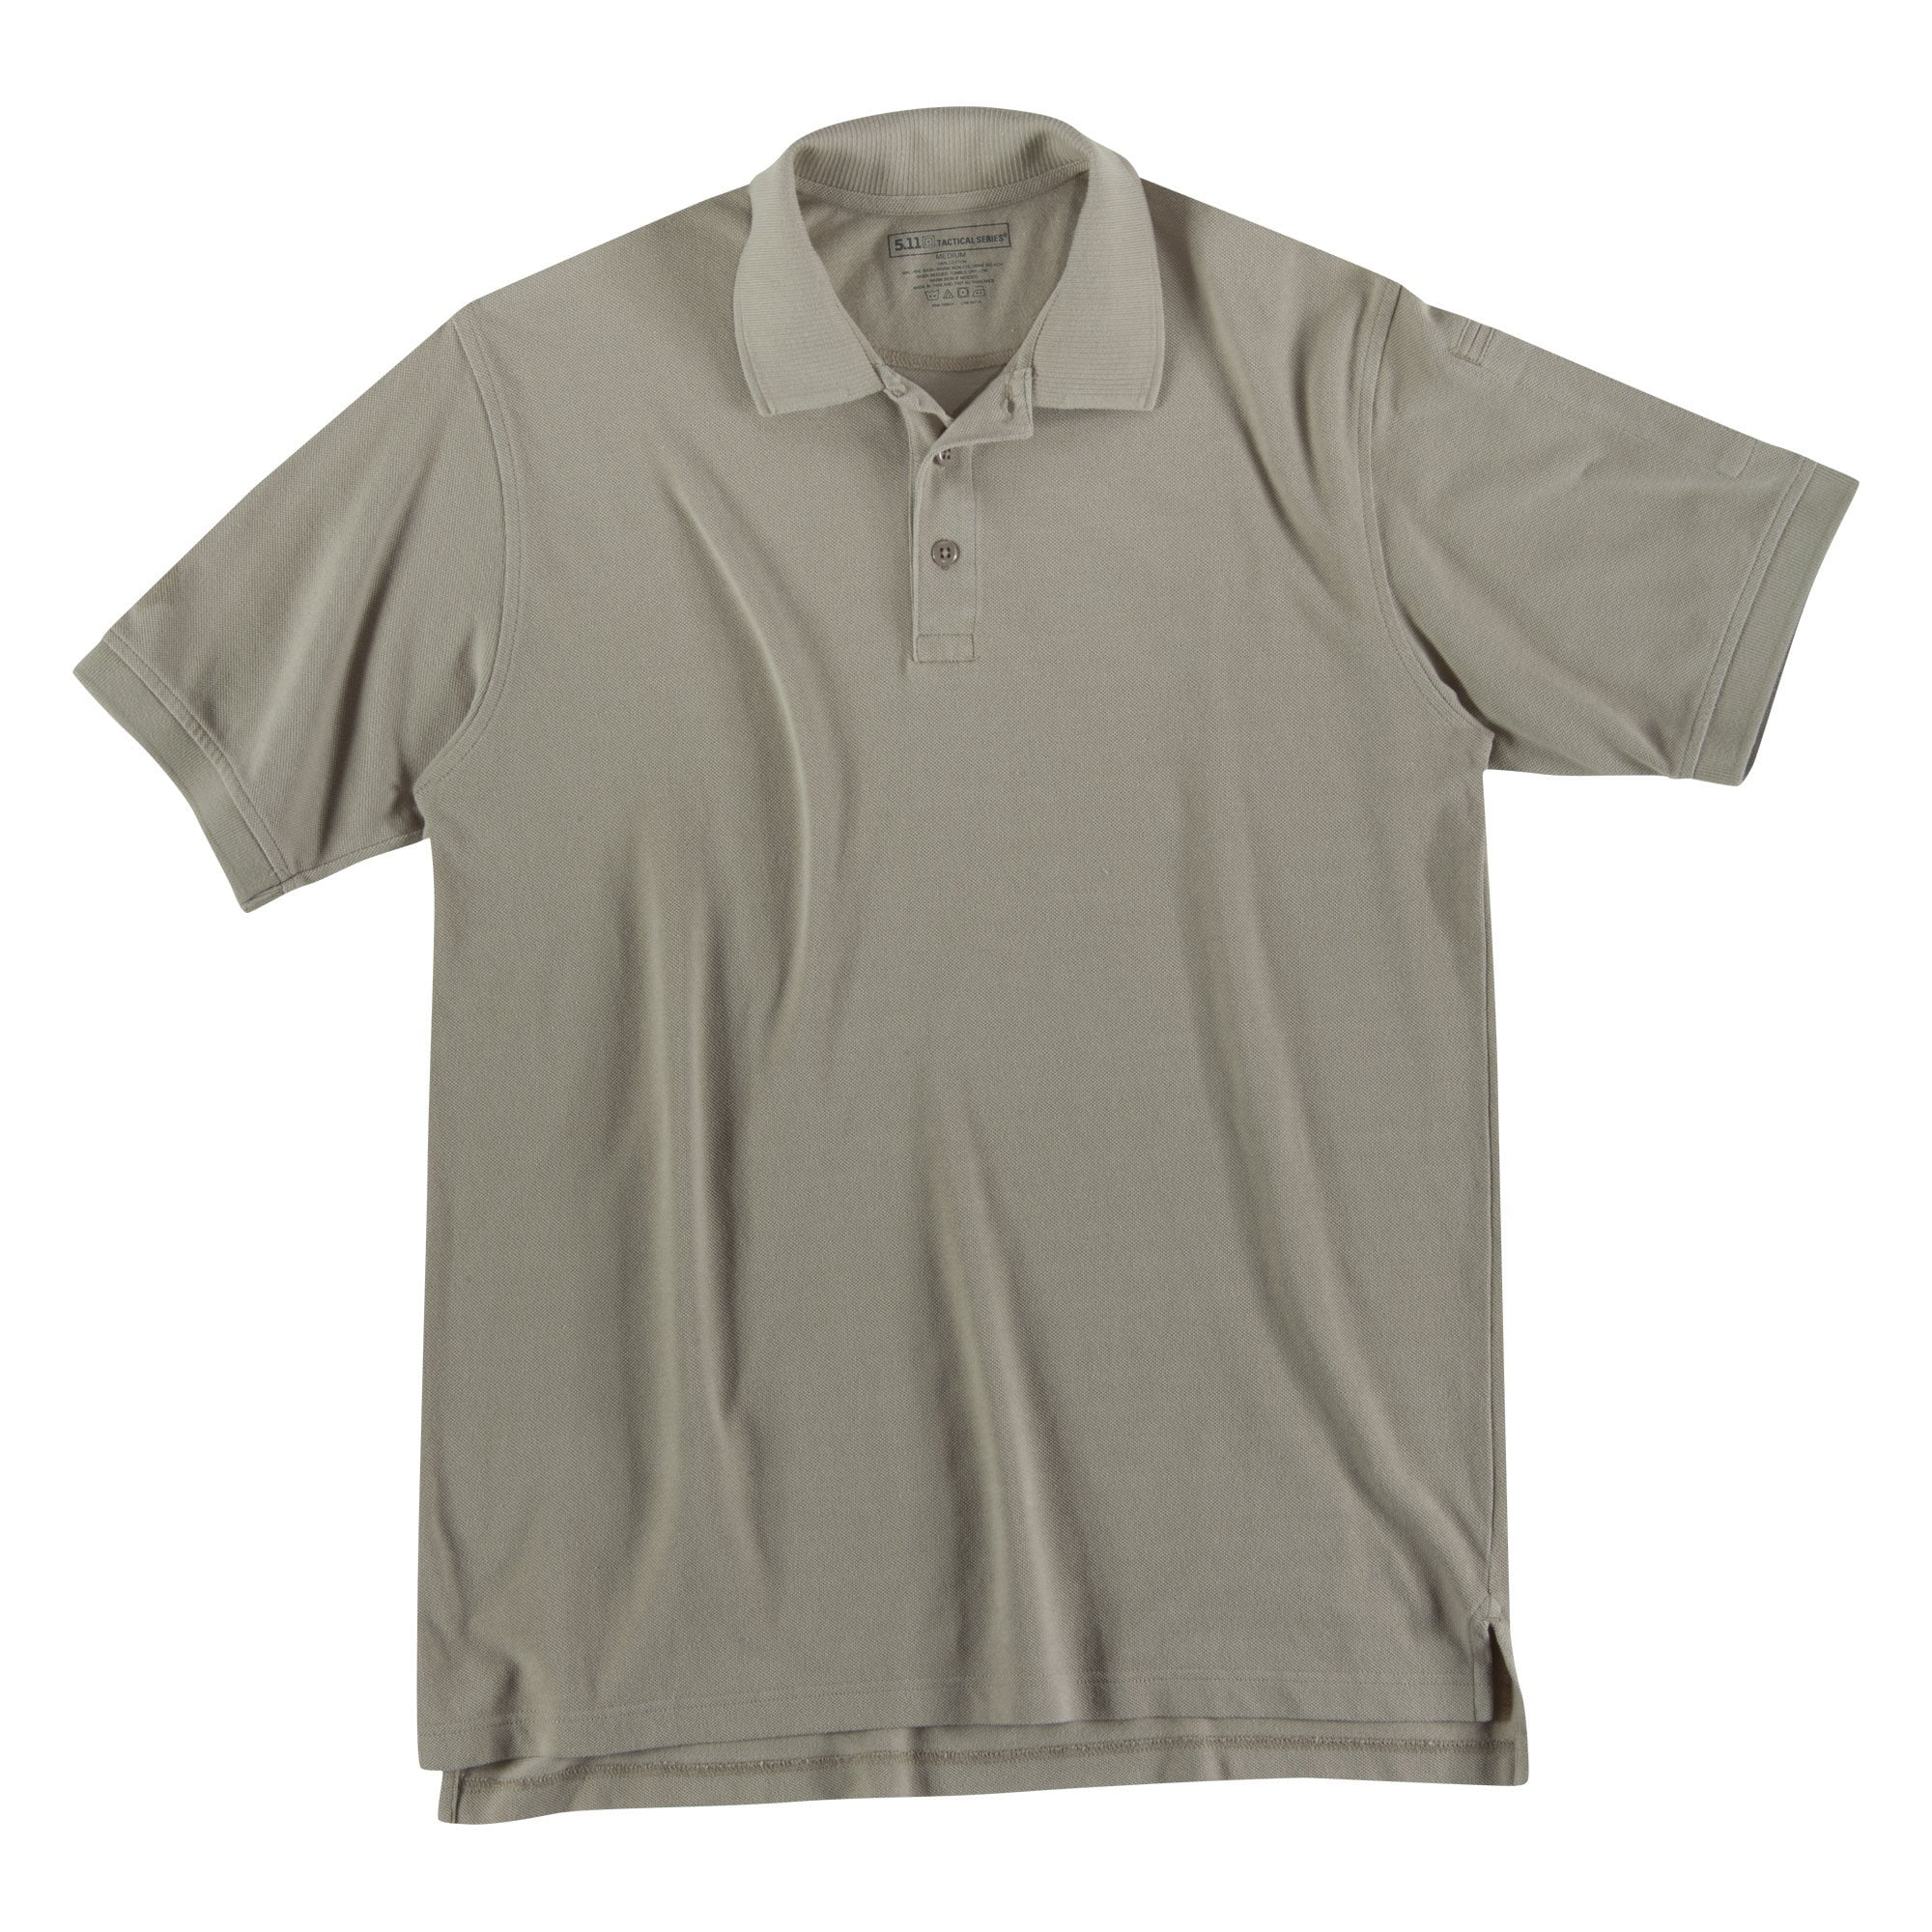 Style 41060 Wrinkle-Resistant 5.11 Tactical Professional Short Sleeve Polo Shirt Cotton Fabric 